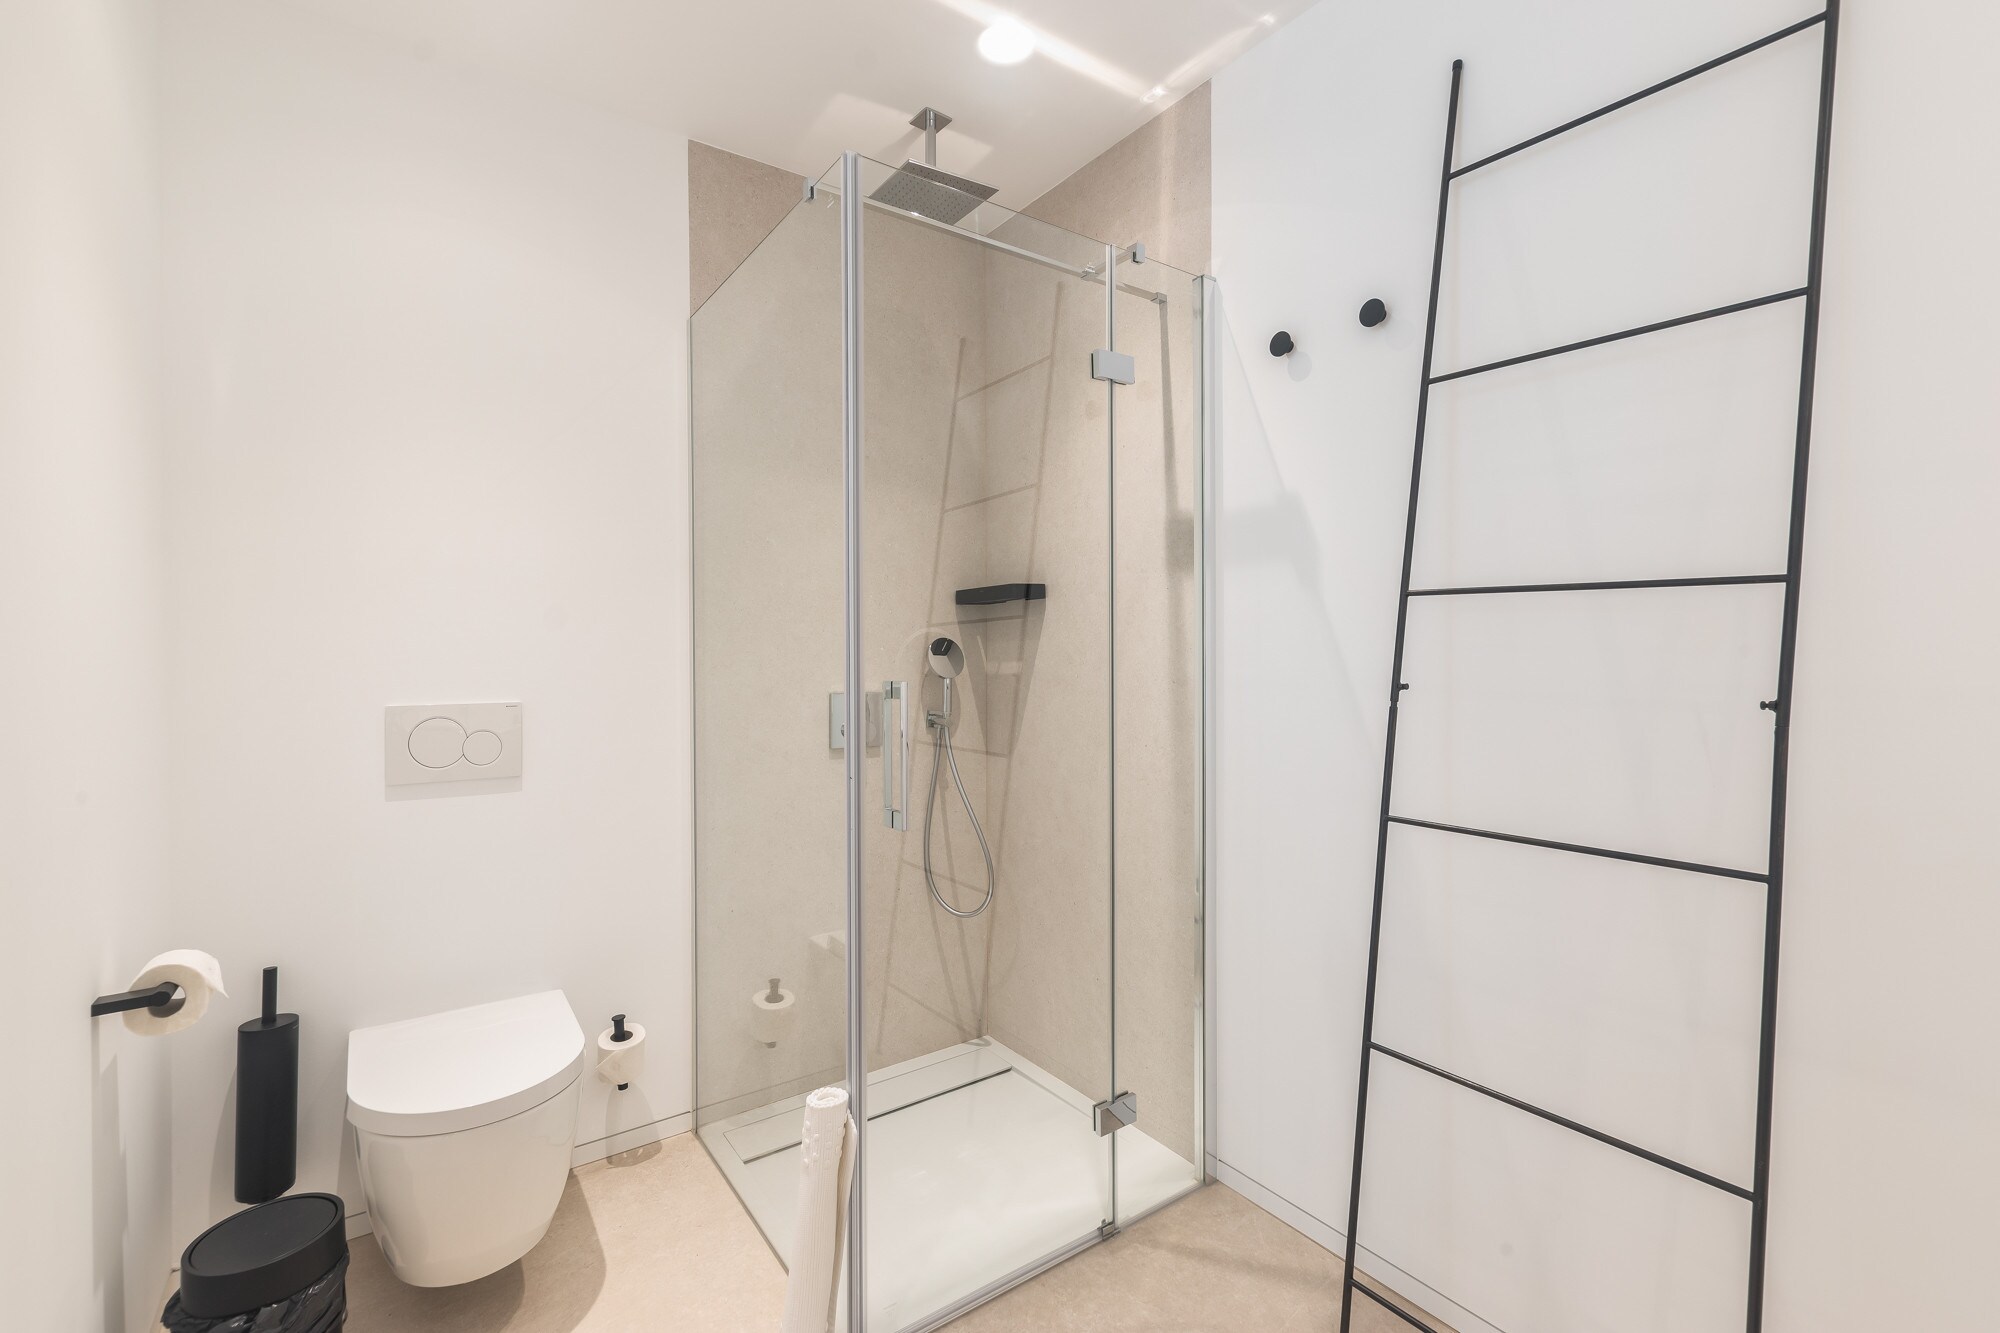 Spacious bathroom with bath and floor-level walk-in shower